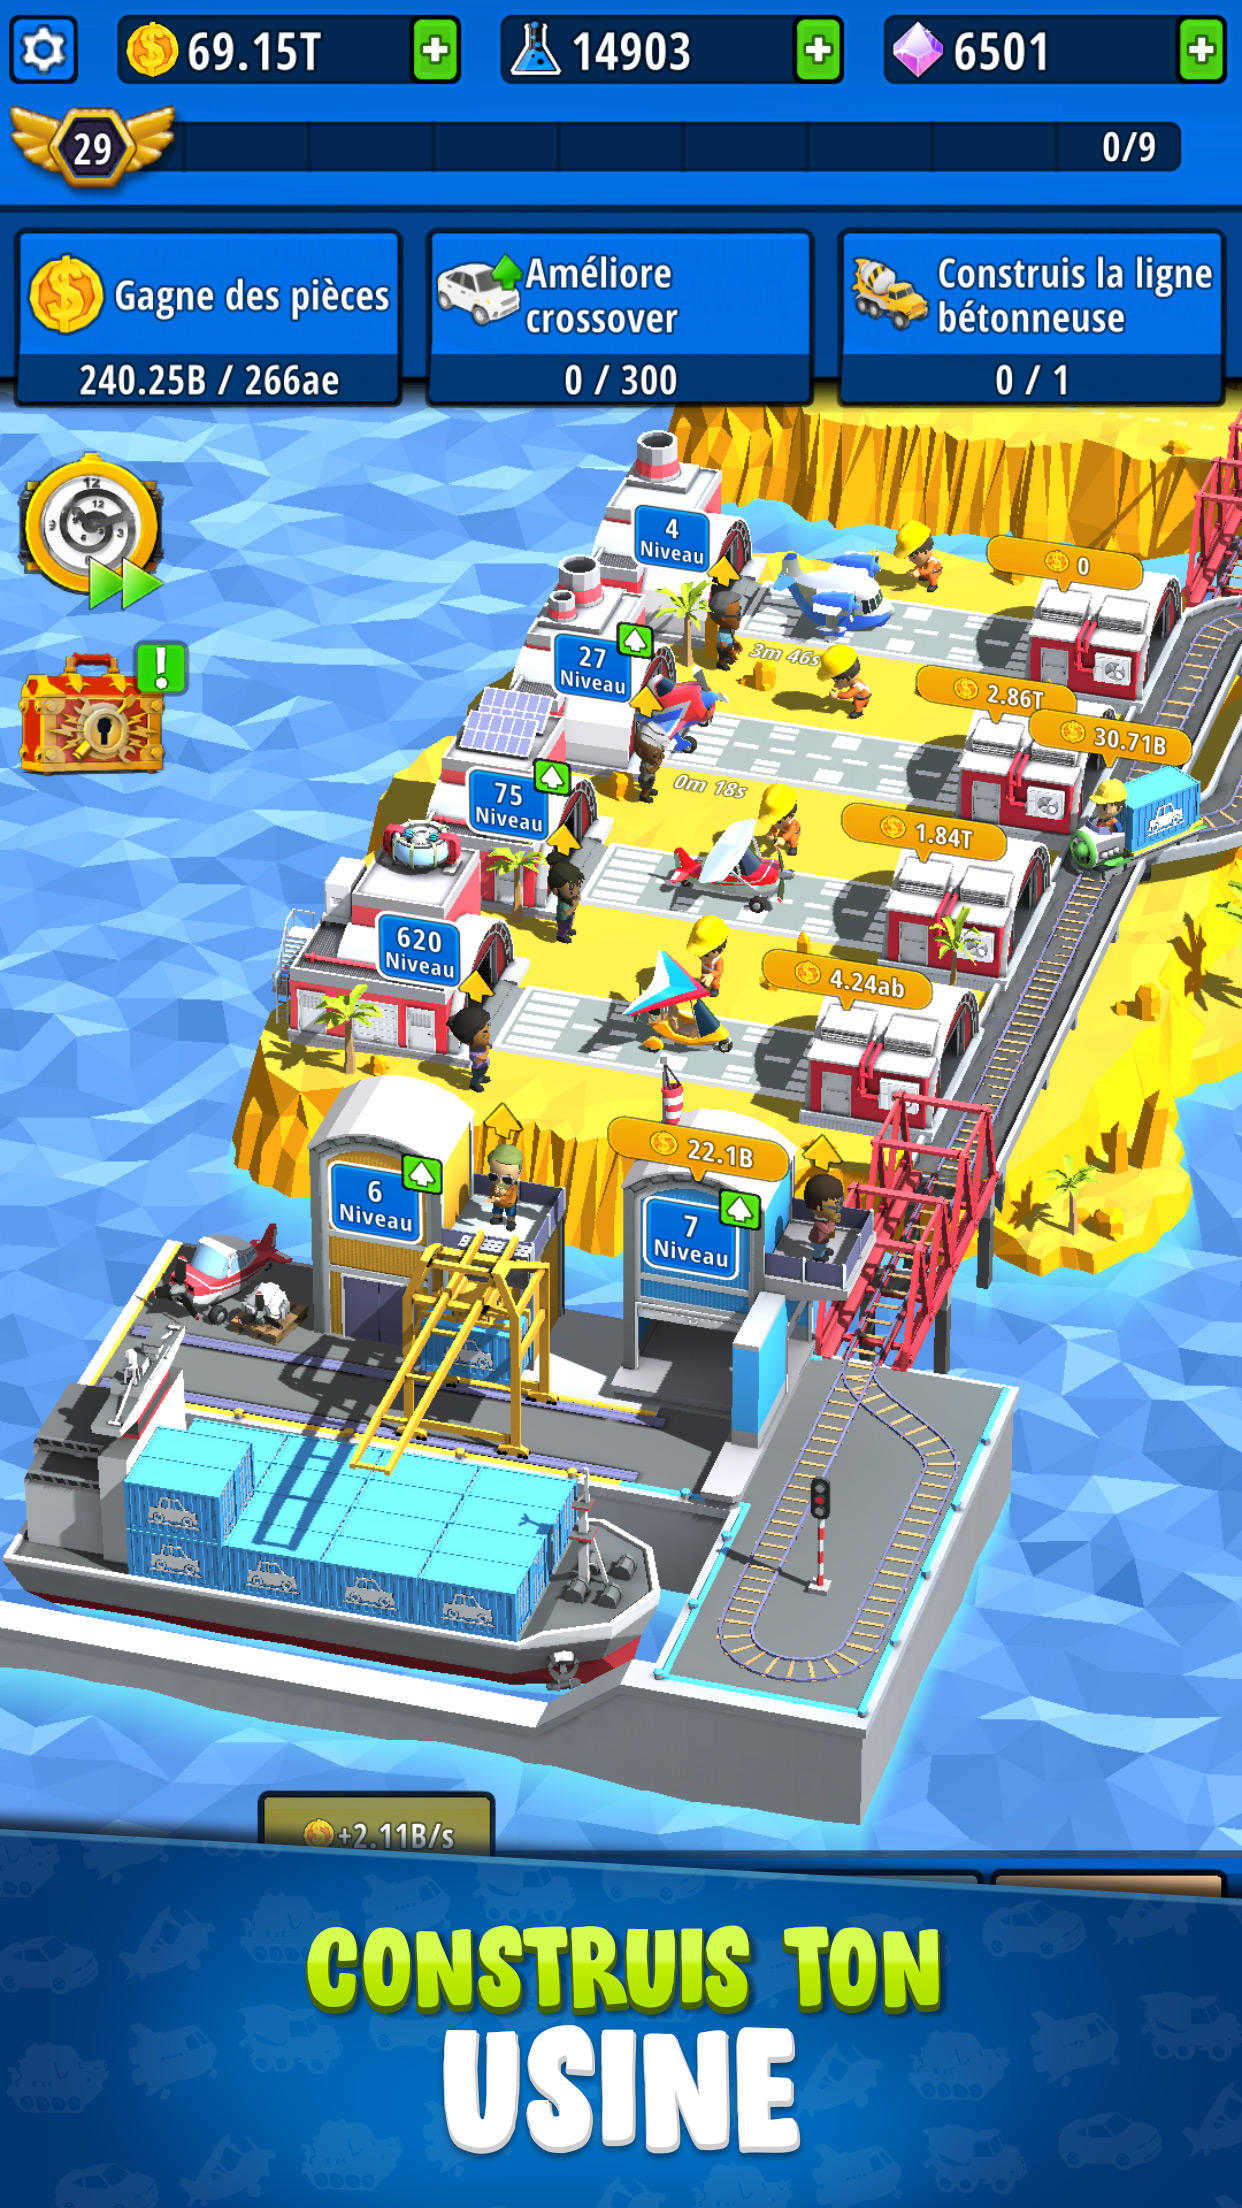 Screenshot 1 of Idle Inventor - Factory Tycoon 1.3.10